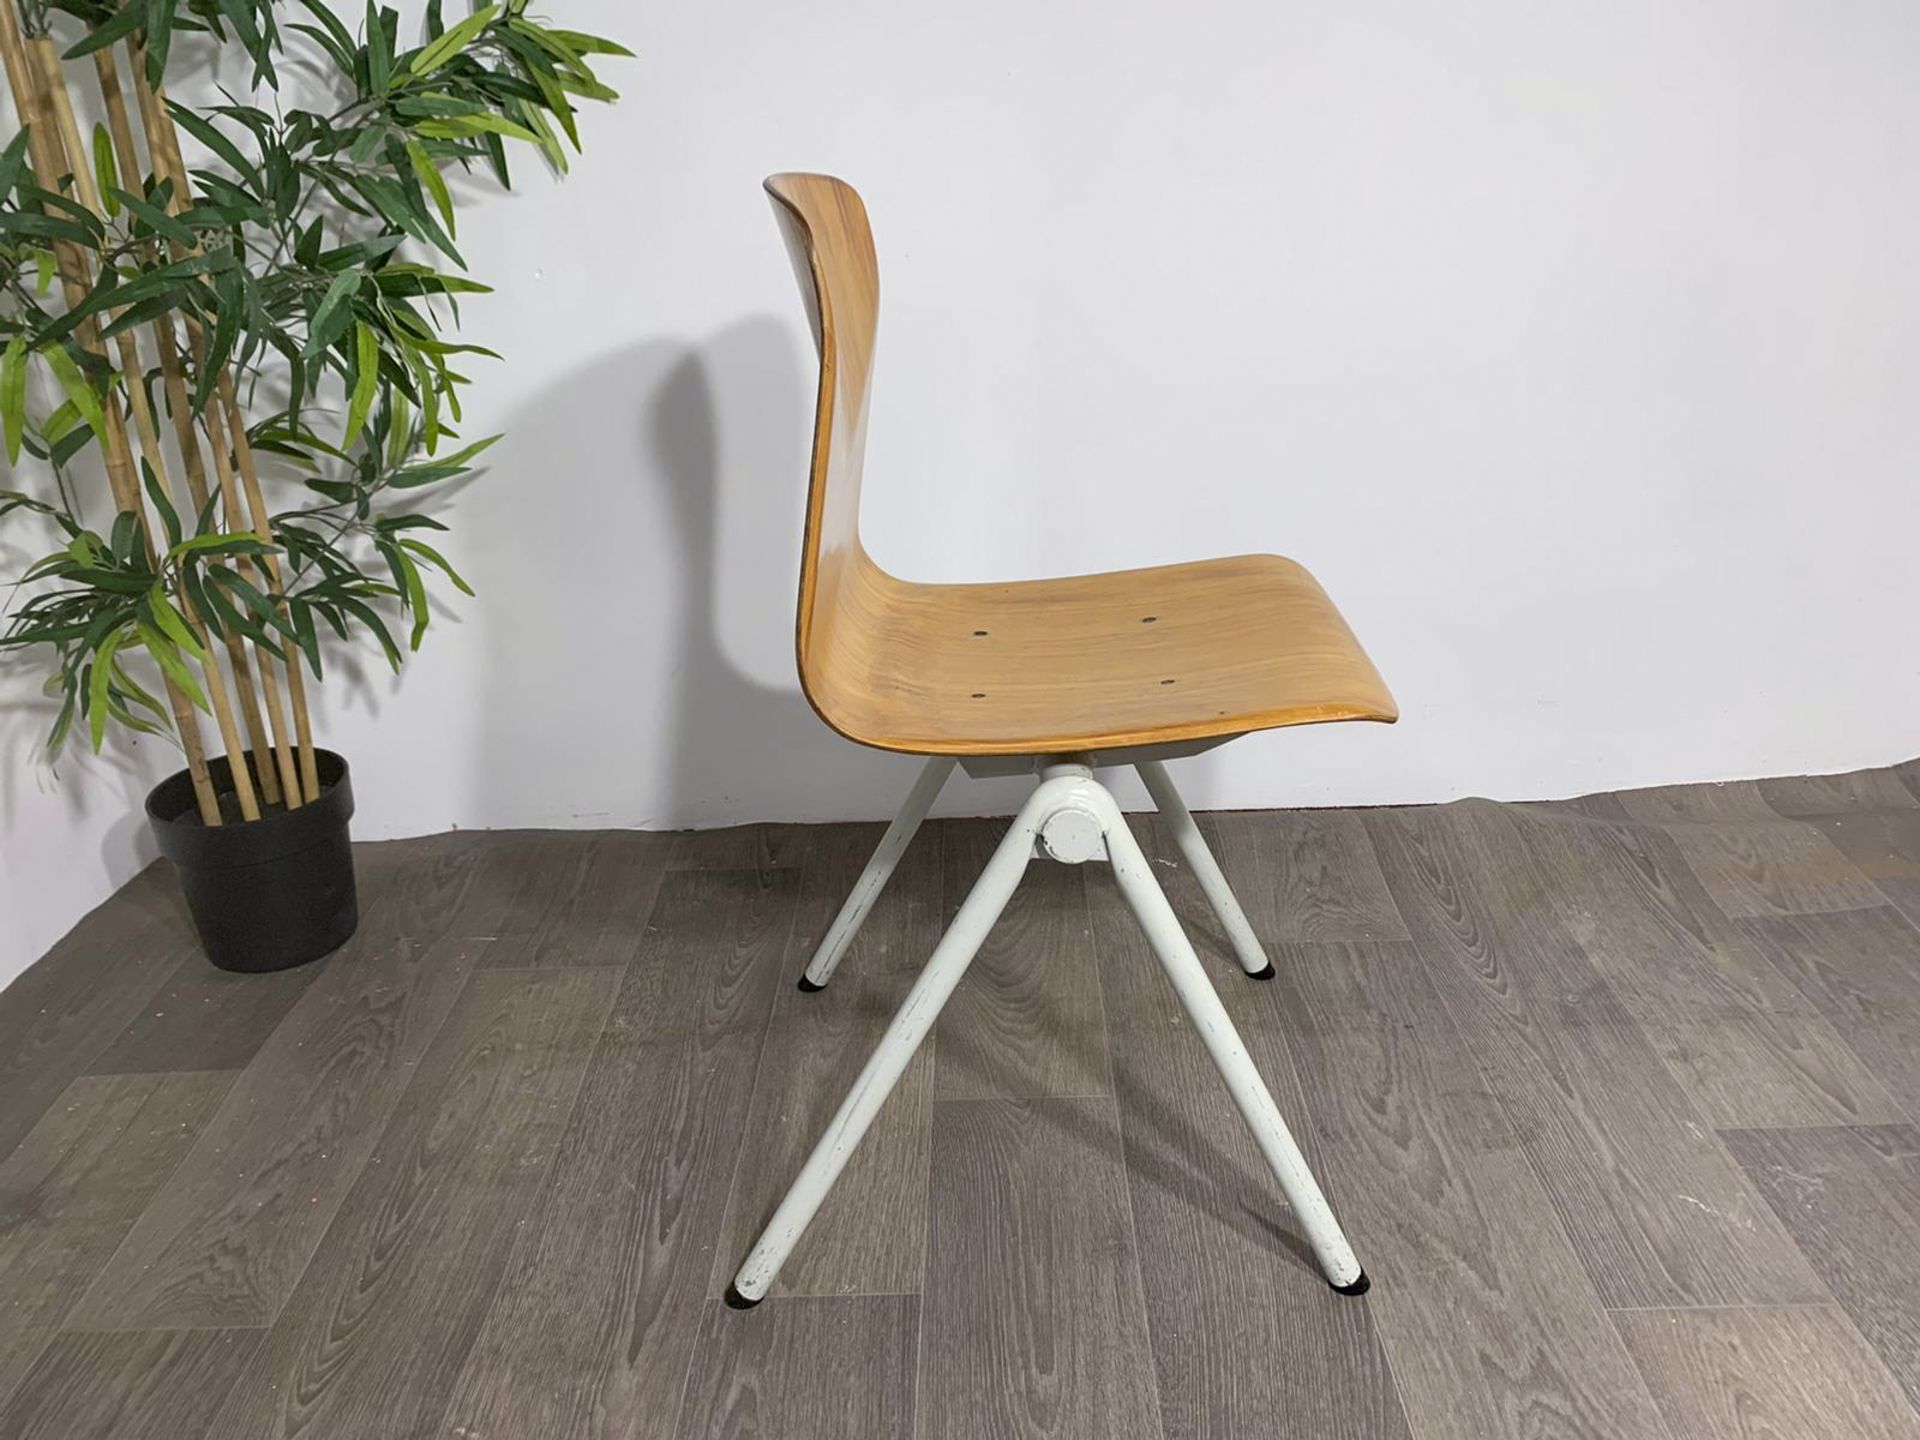 Mid Century Wooden Chair with Steel Legs - Image 5 of 9